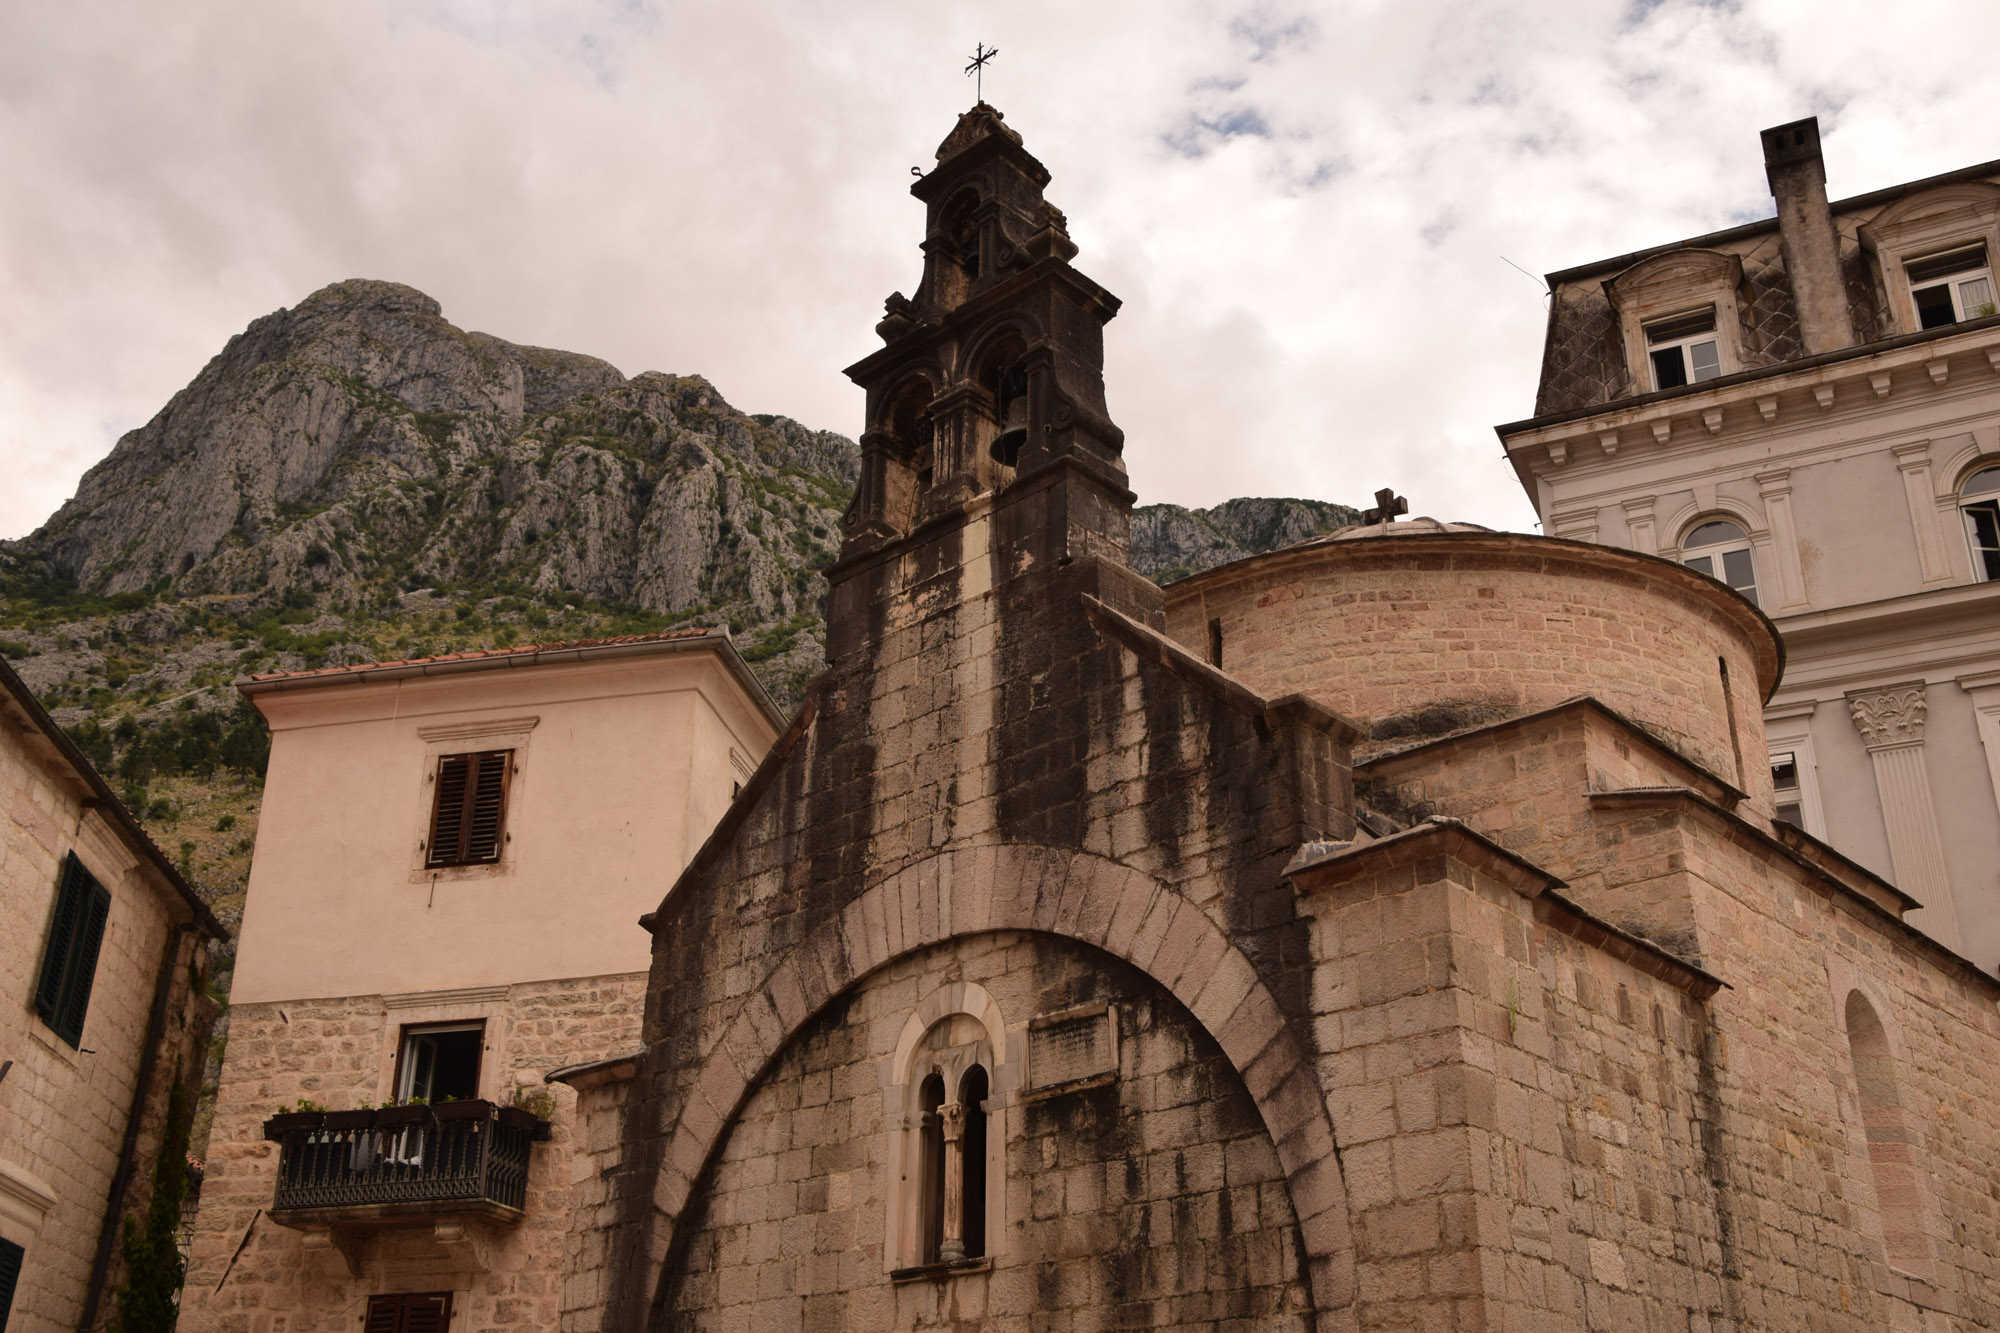 Old city of Kotor